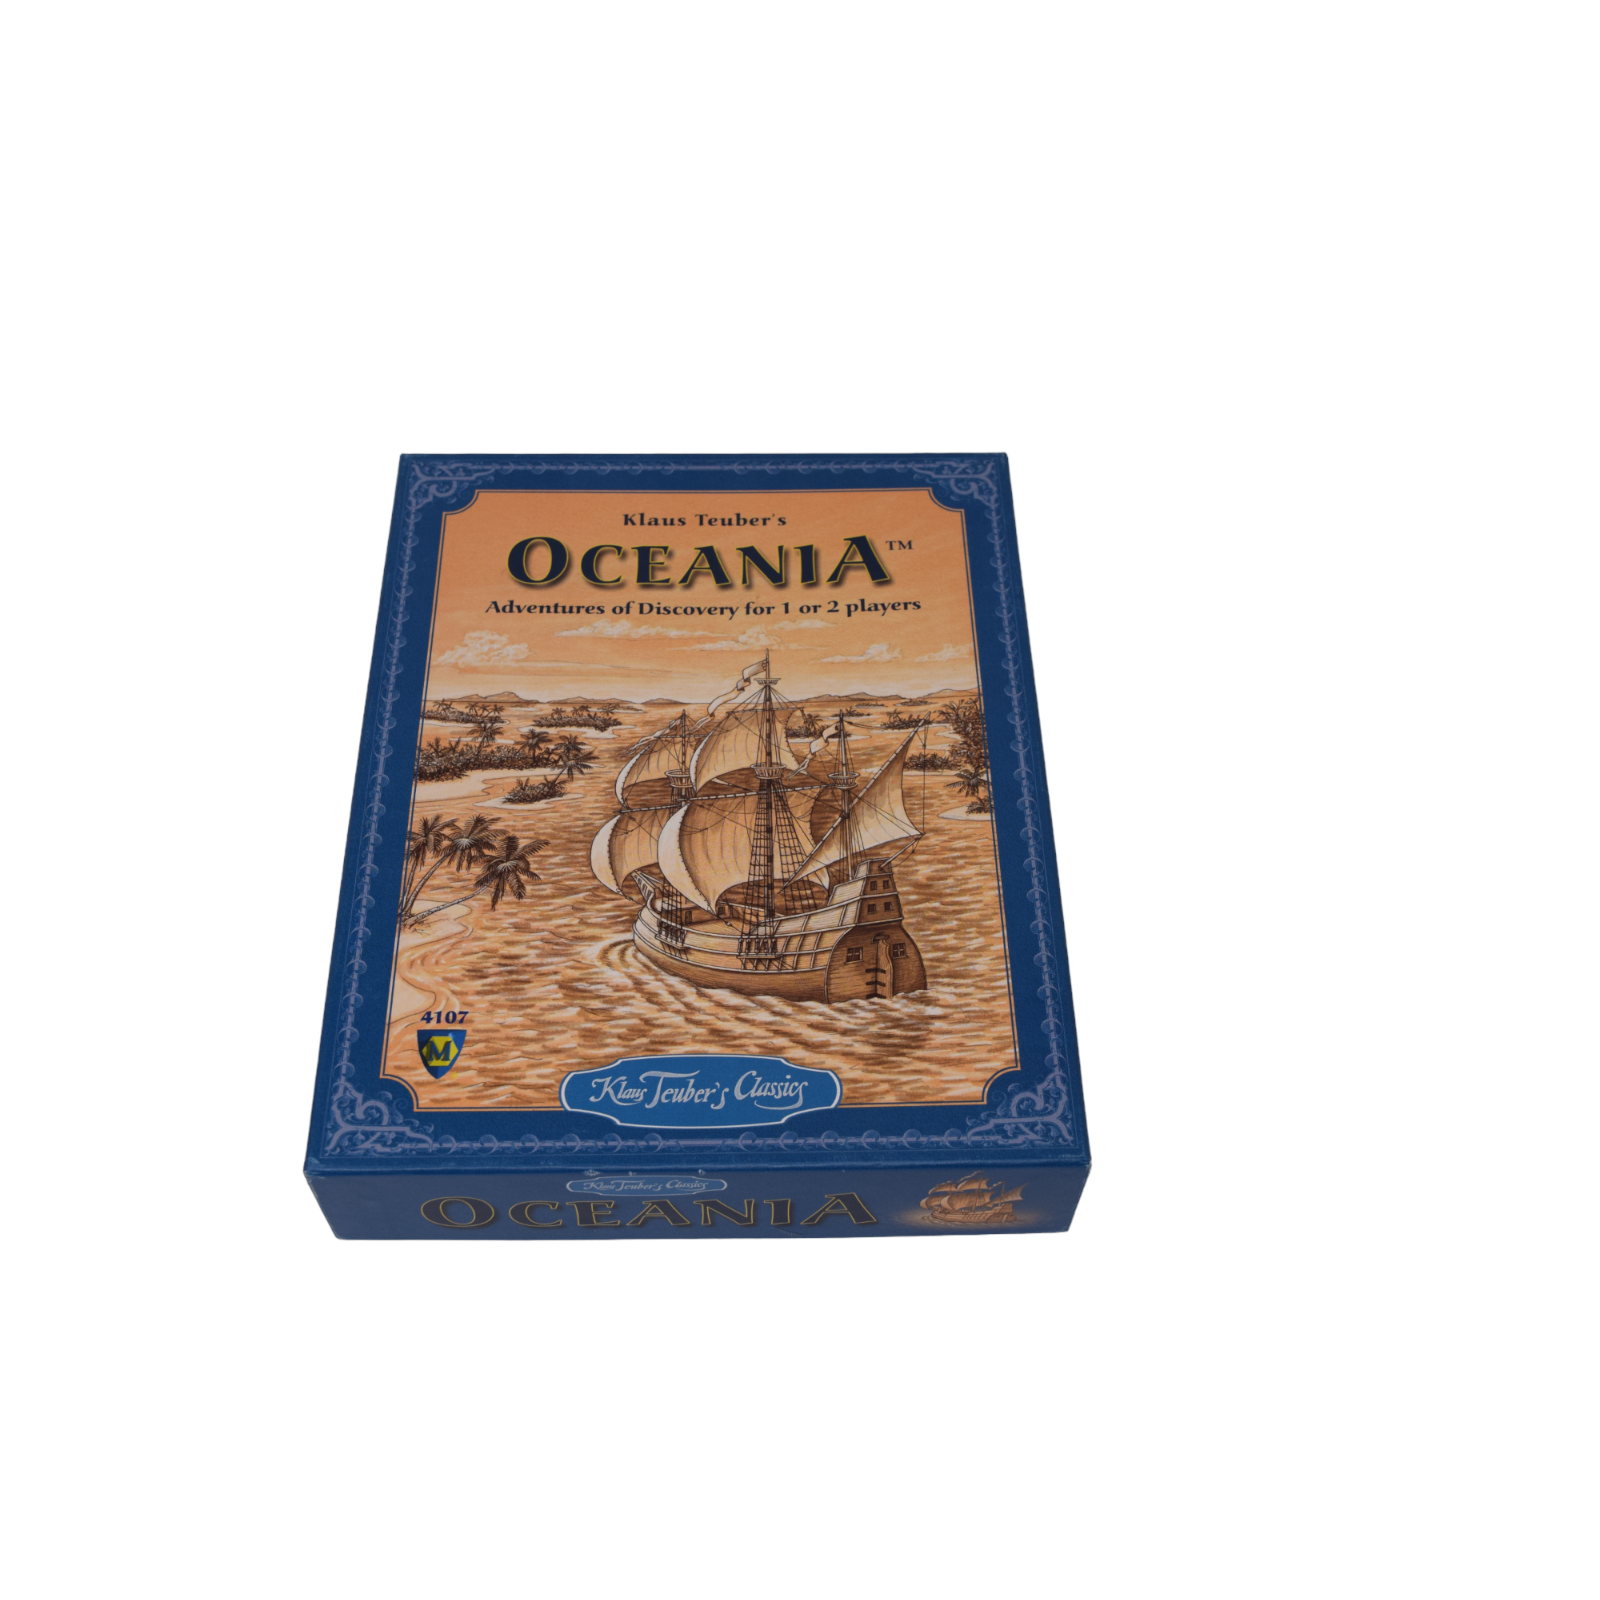 Klaus Teuber's Oceania Game Adventure of Discovery Mayfair Games - $11.87